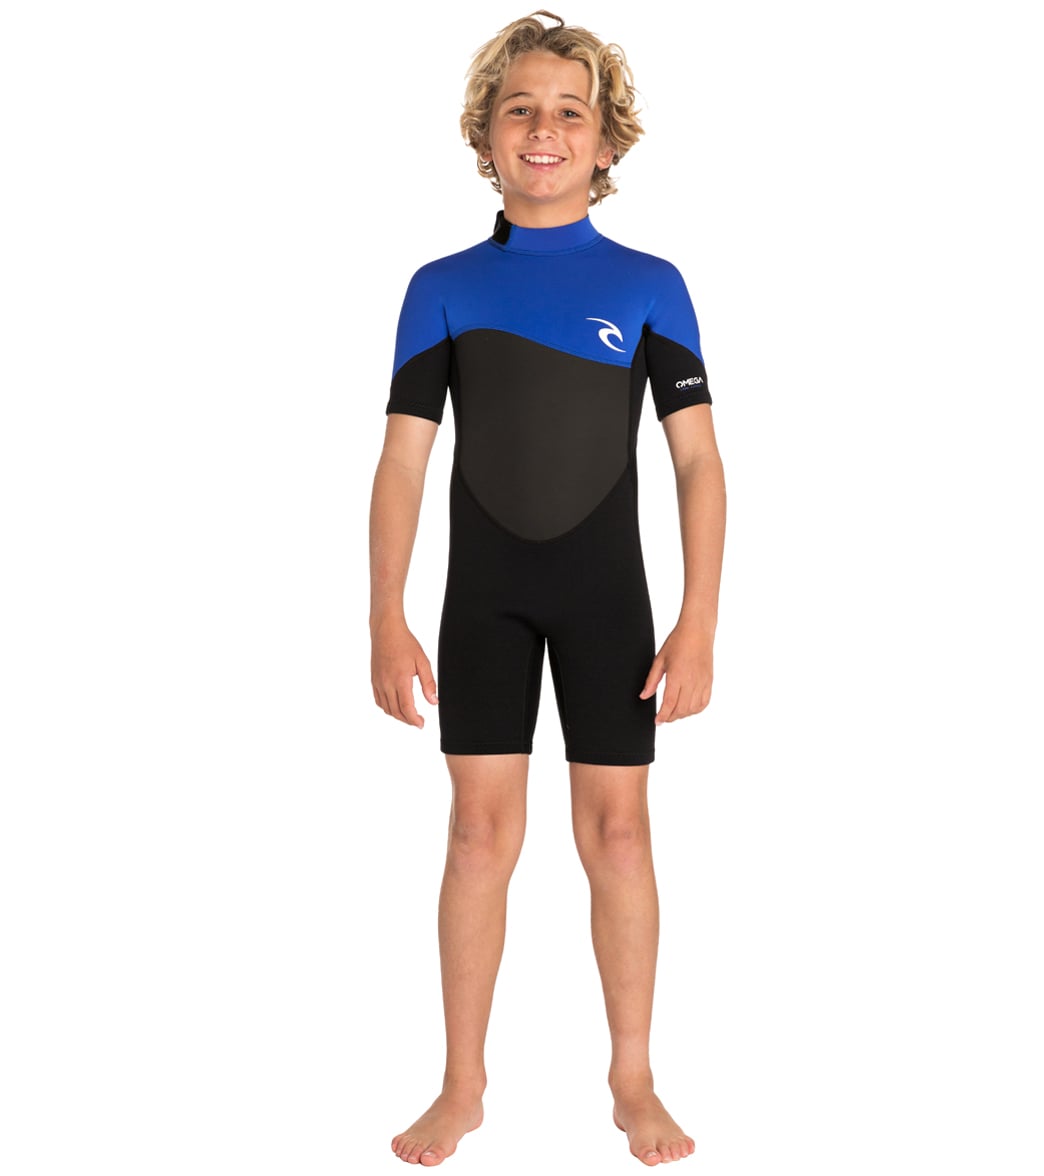 Rip Curl Boys' Omega 1.5mm Short Sleeve Spring Suit at SwimOutlet.com ...